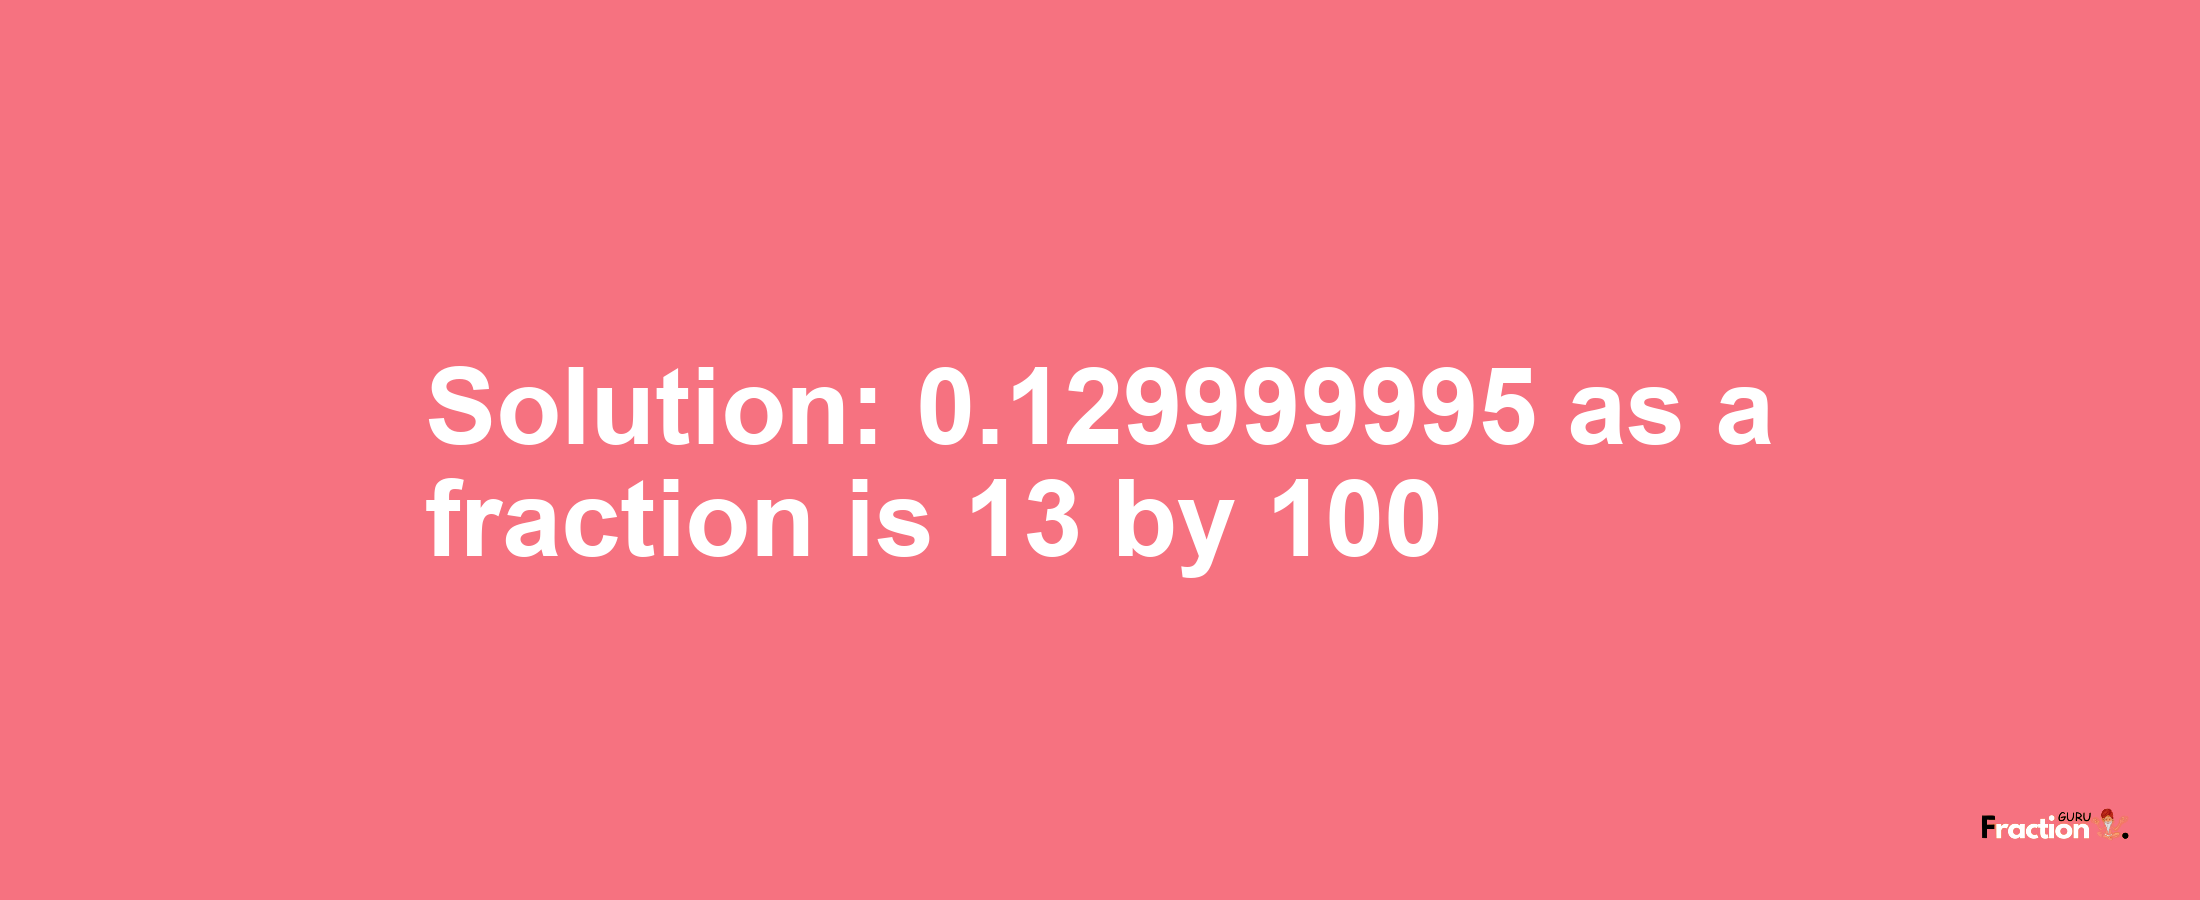 Solution:0.129999995 as a fraction is 13/100